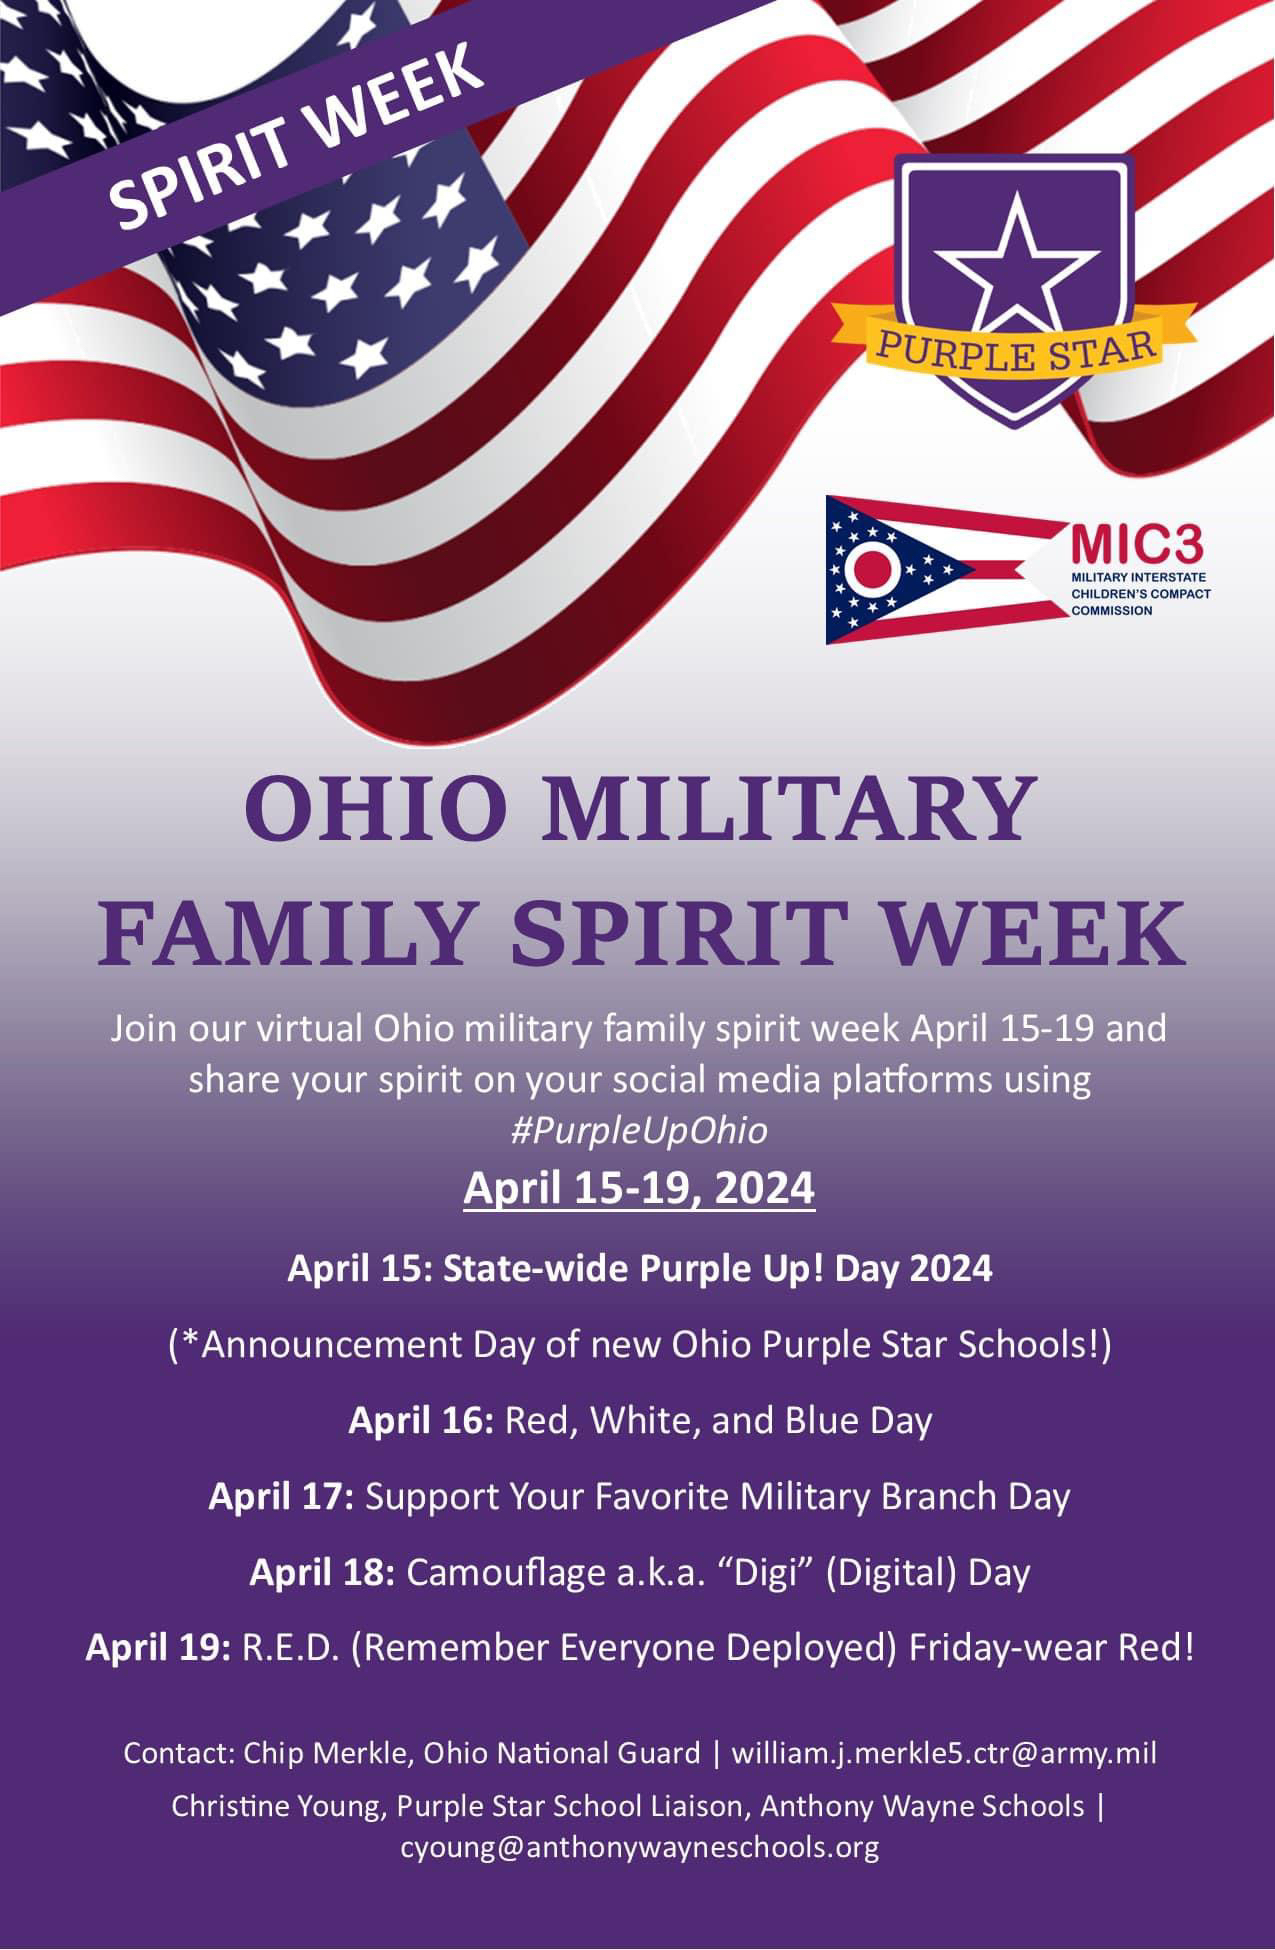 Ohio Military Family Spirit Week April 15-19, 2024 Monday, April 15 - Purple Up! Day (wear purple)  Tuesday, April 16 - Red, White, and Blue Day Wednesday, April 17 - Support Your Favorite Military Branch Day Thursday, April 18 - Camouflage, a.k.a. "Digi" (Digital) Day  Friday, April 19 - R.E.D. (Remember Everyone Deployed) (wear red) Day  #PurpleUpOhio #PurpleStarSchool #AAGV 